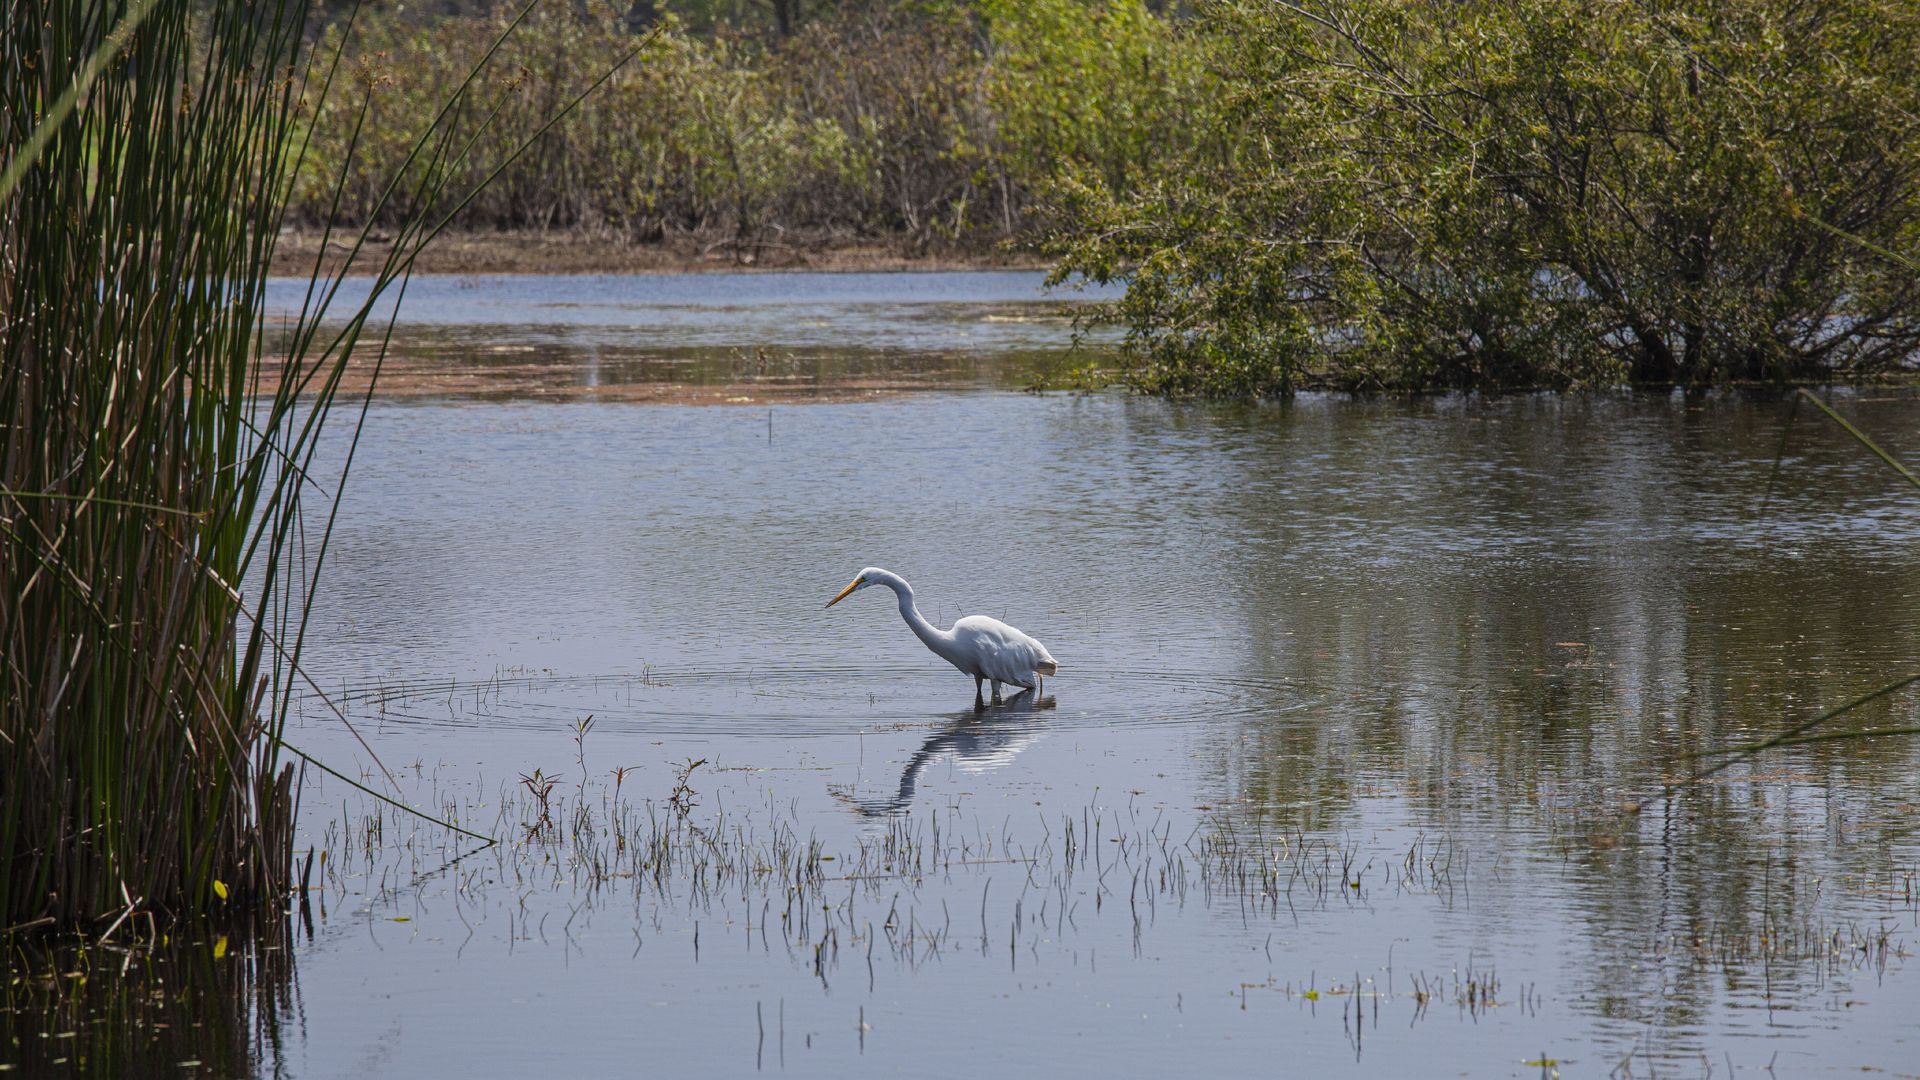 In this image, a heron walks in a marshland